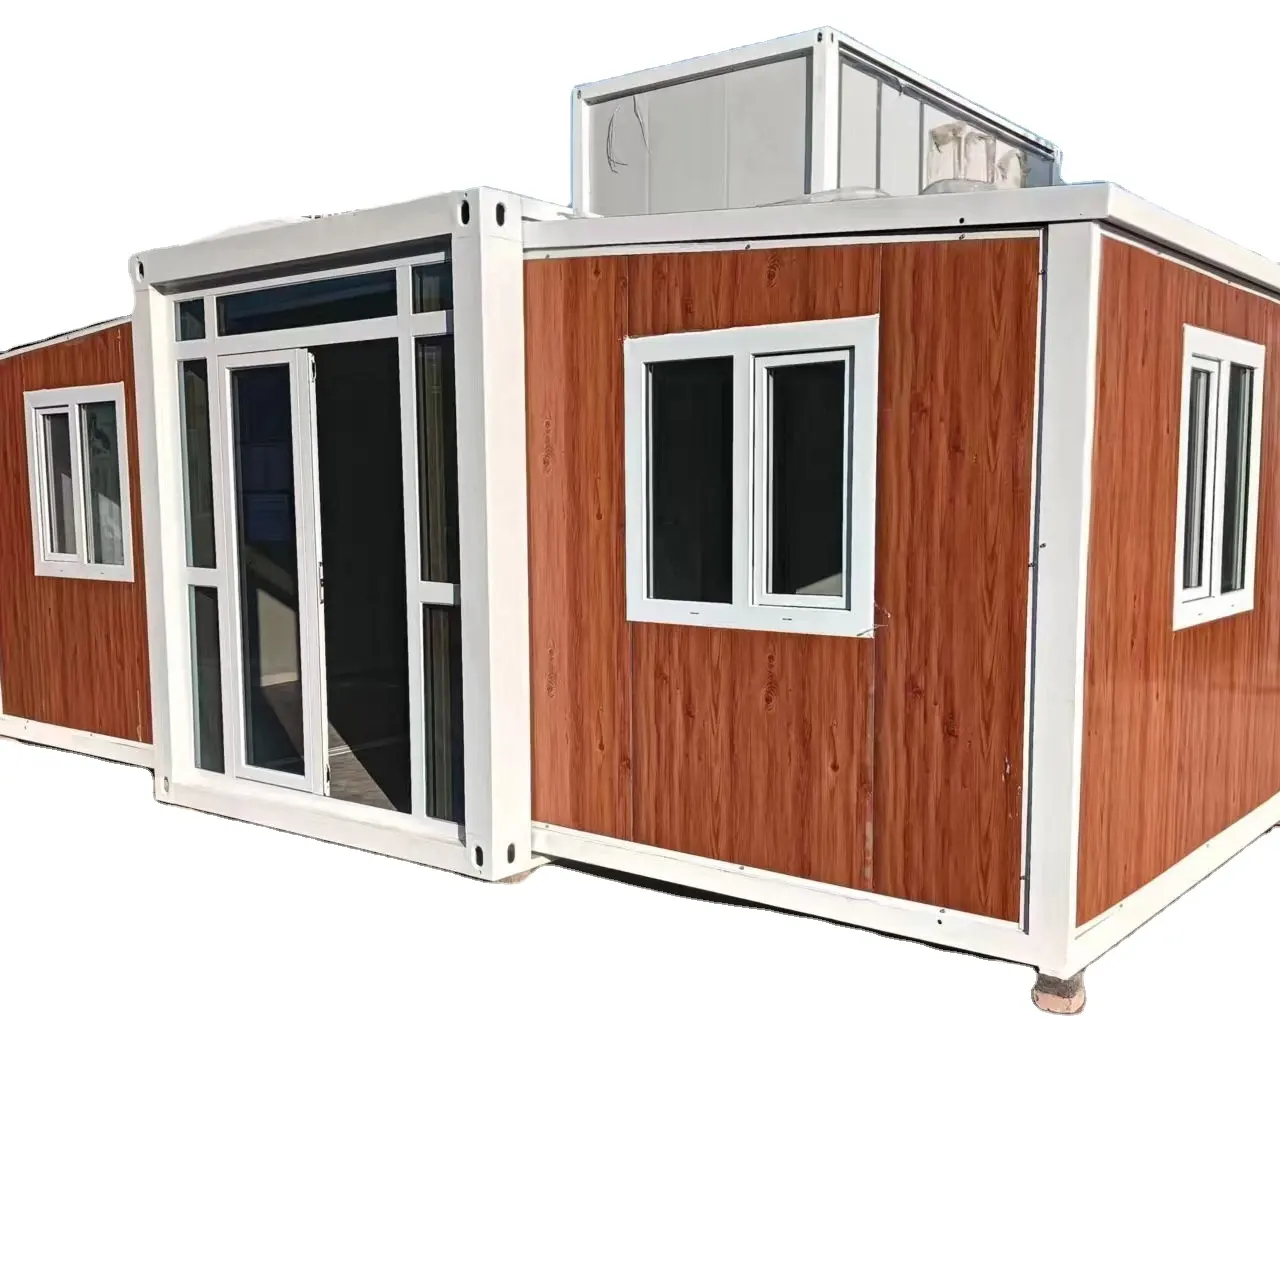 Modulaire Prefab Opvouwbare Container Draagbare Site Appartement Tuin Kantoren Containers Kantoor Woonkamer Container Huis Te Koop